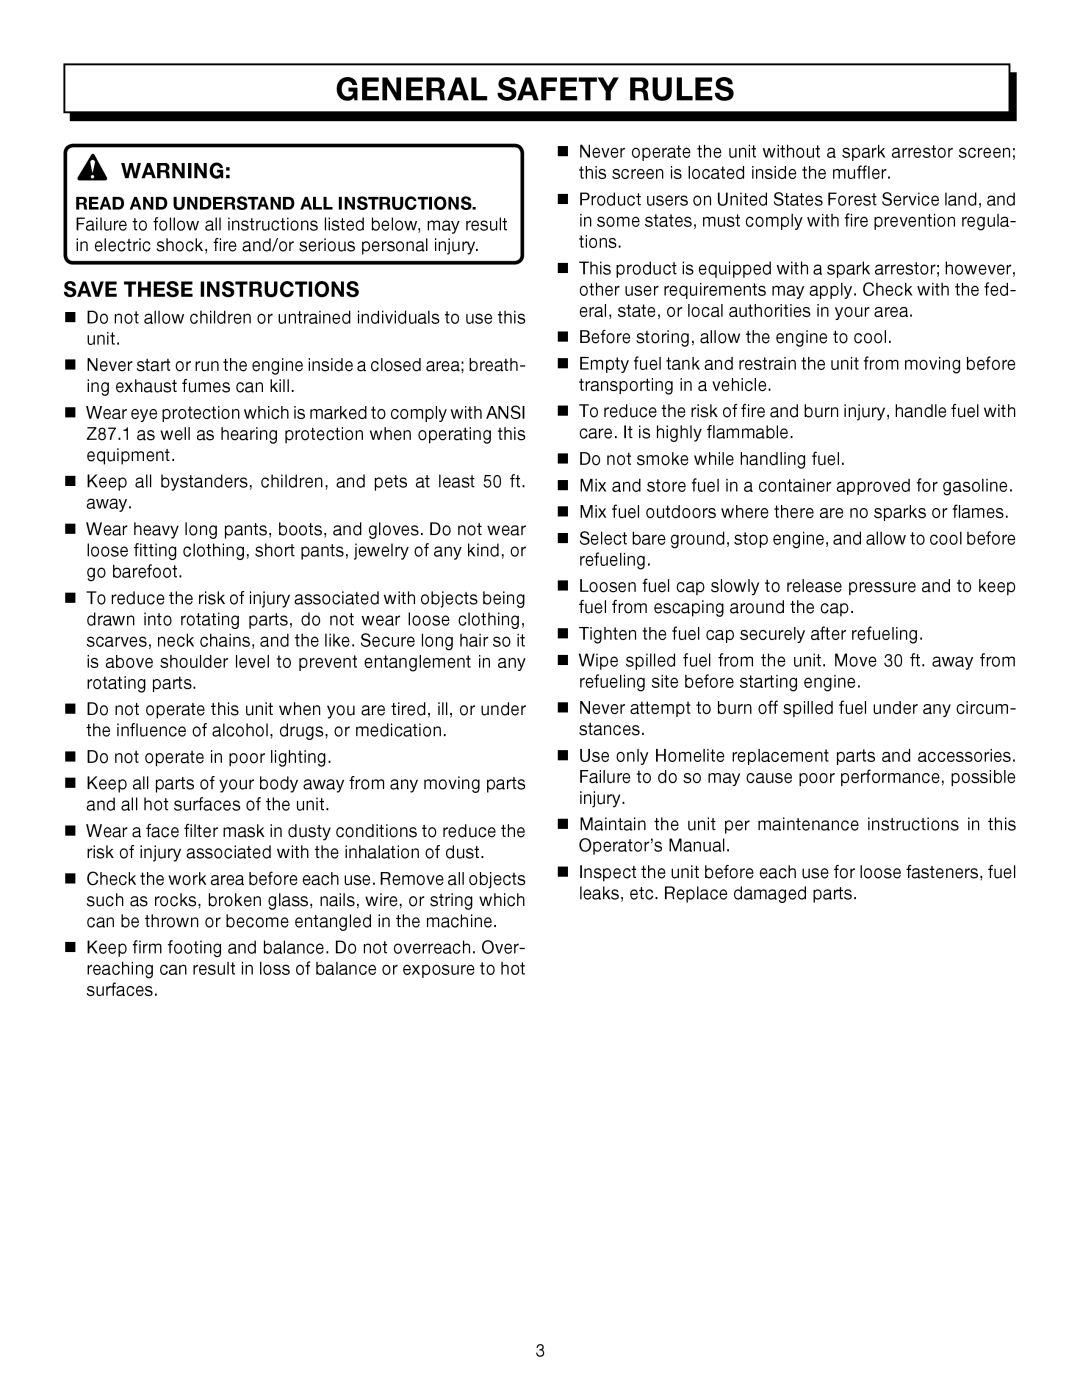 Homelite UT08042, UT08542 manual General Safety Rules, Save These Instructions 